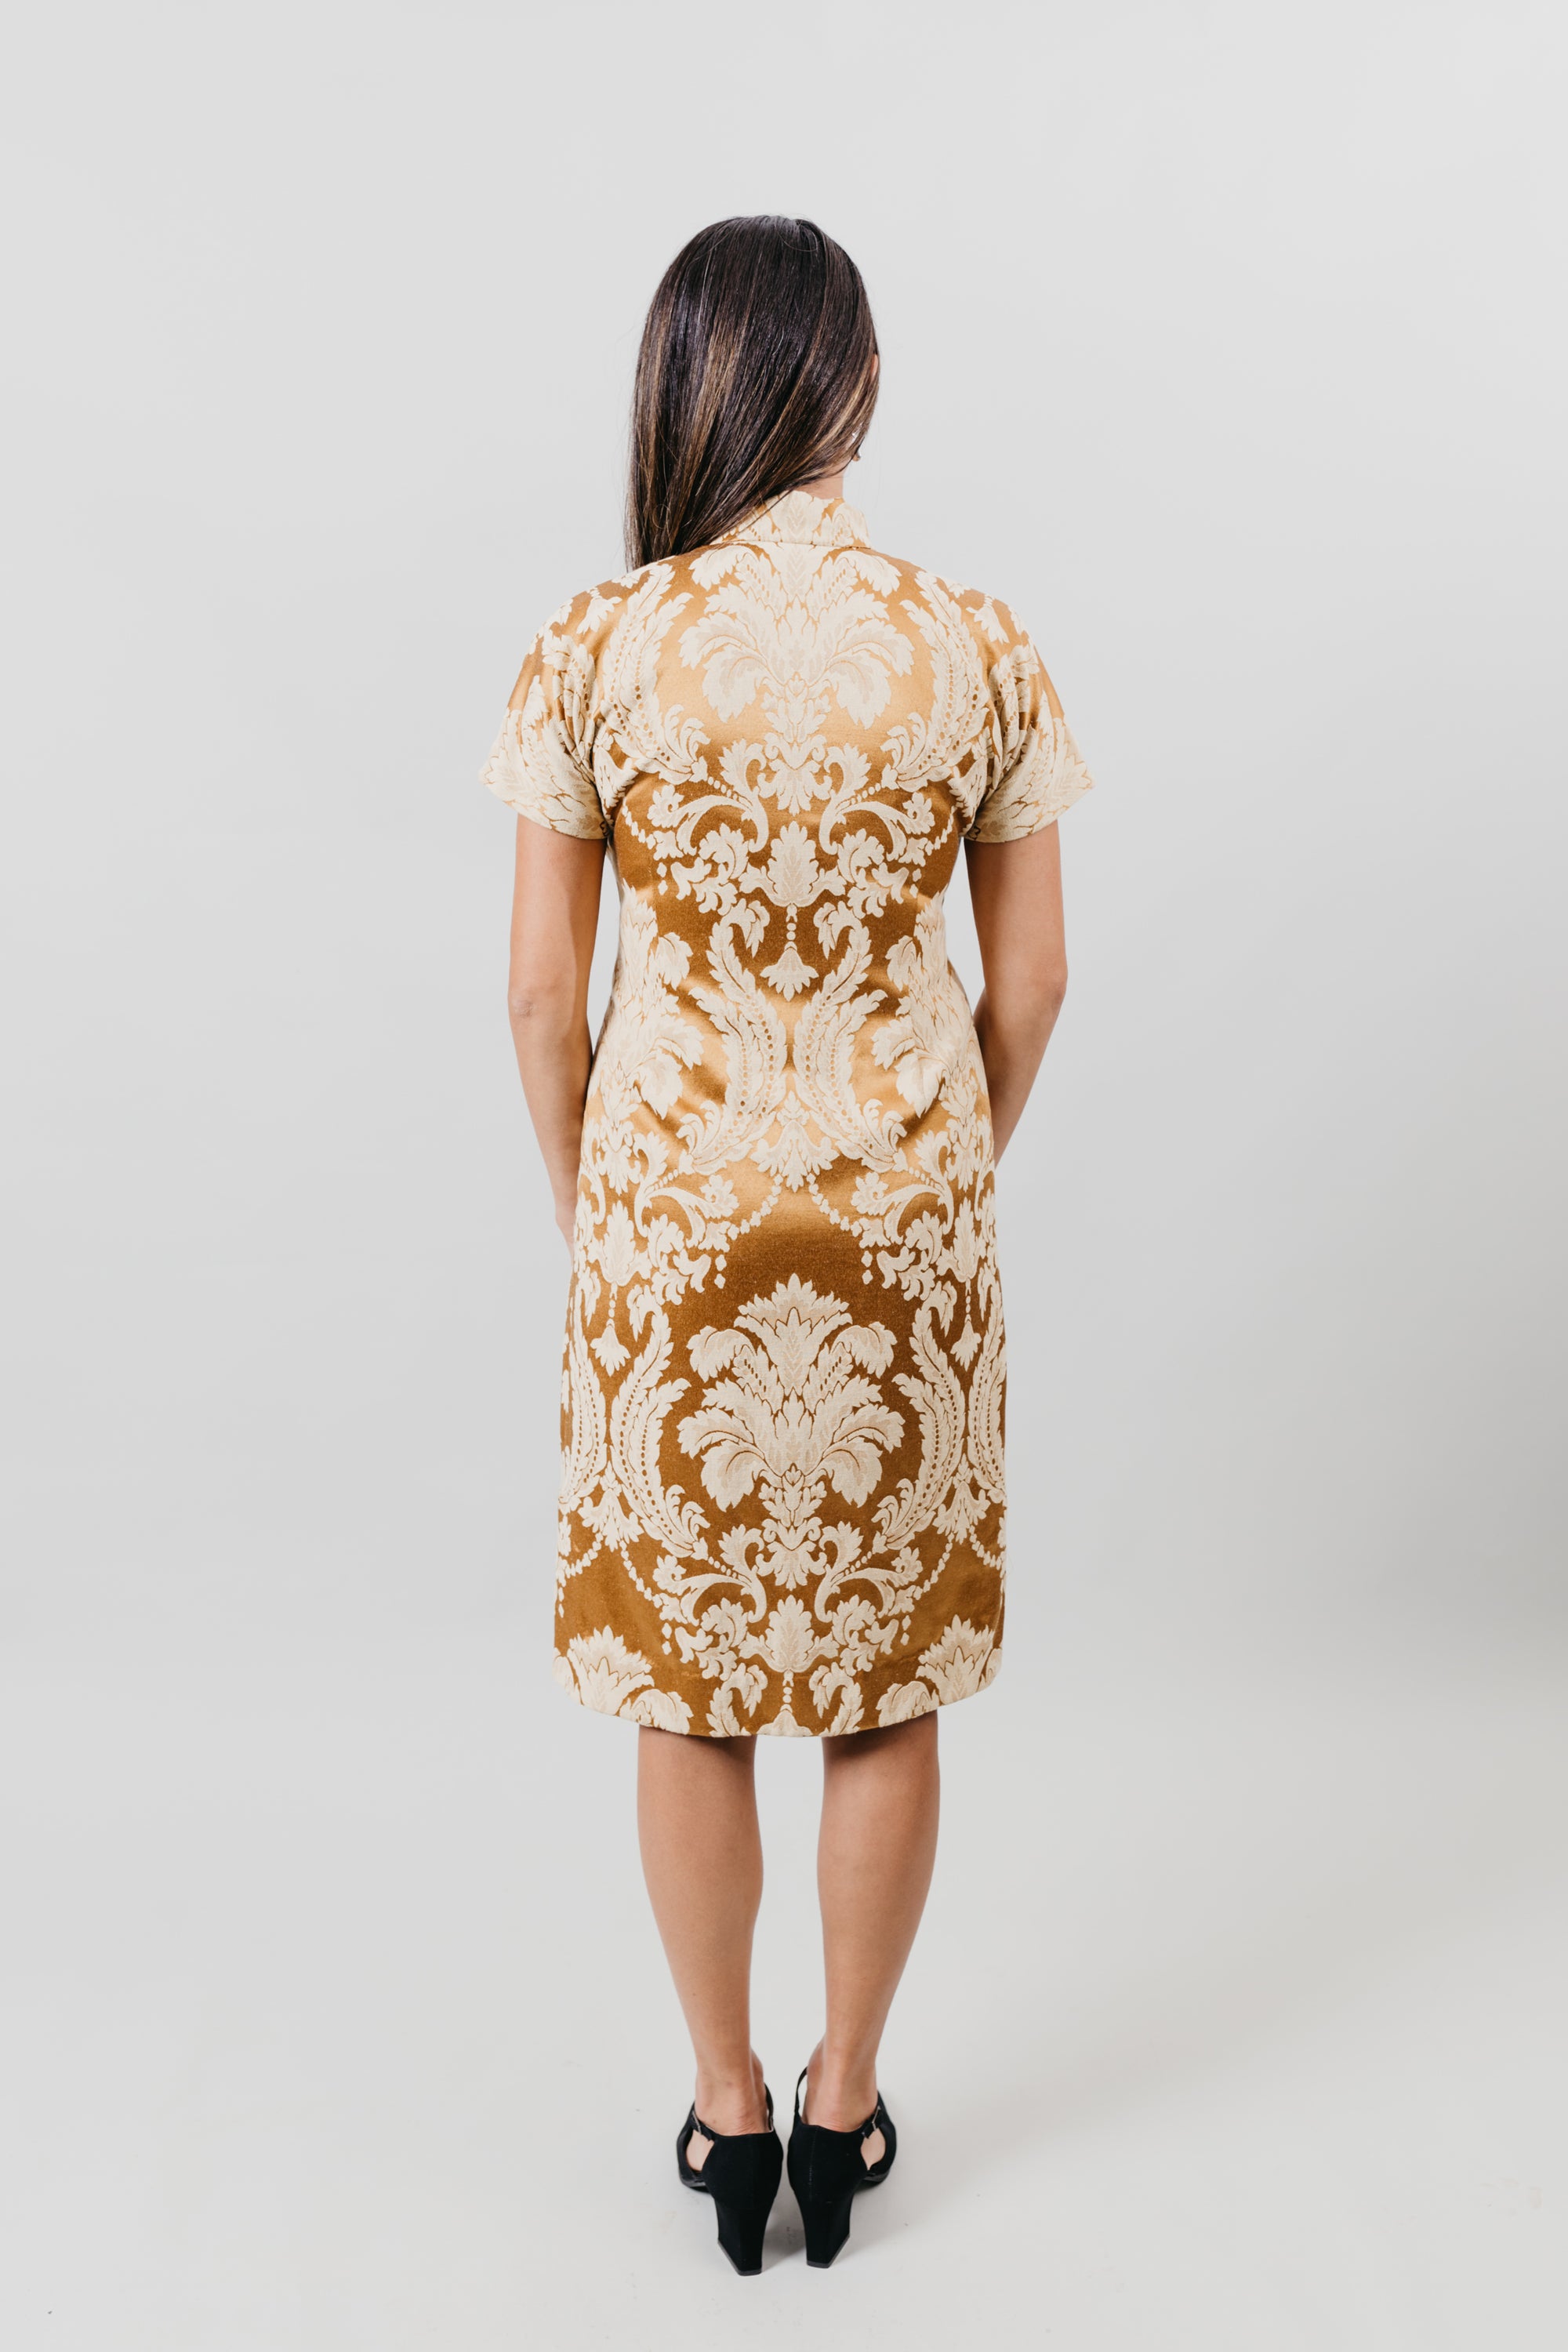 Asian woman wearing a gold brocade knee-length cheogsam - back view in front of a white back ground..